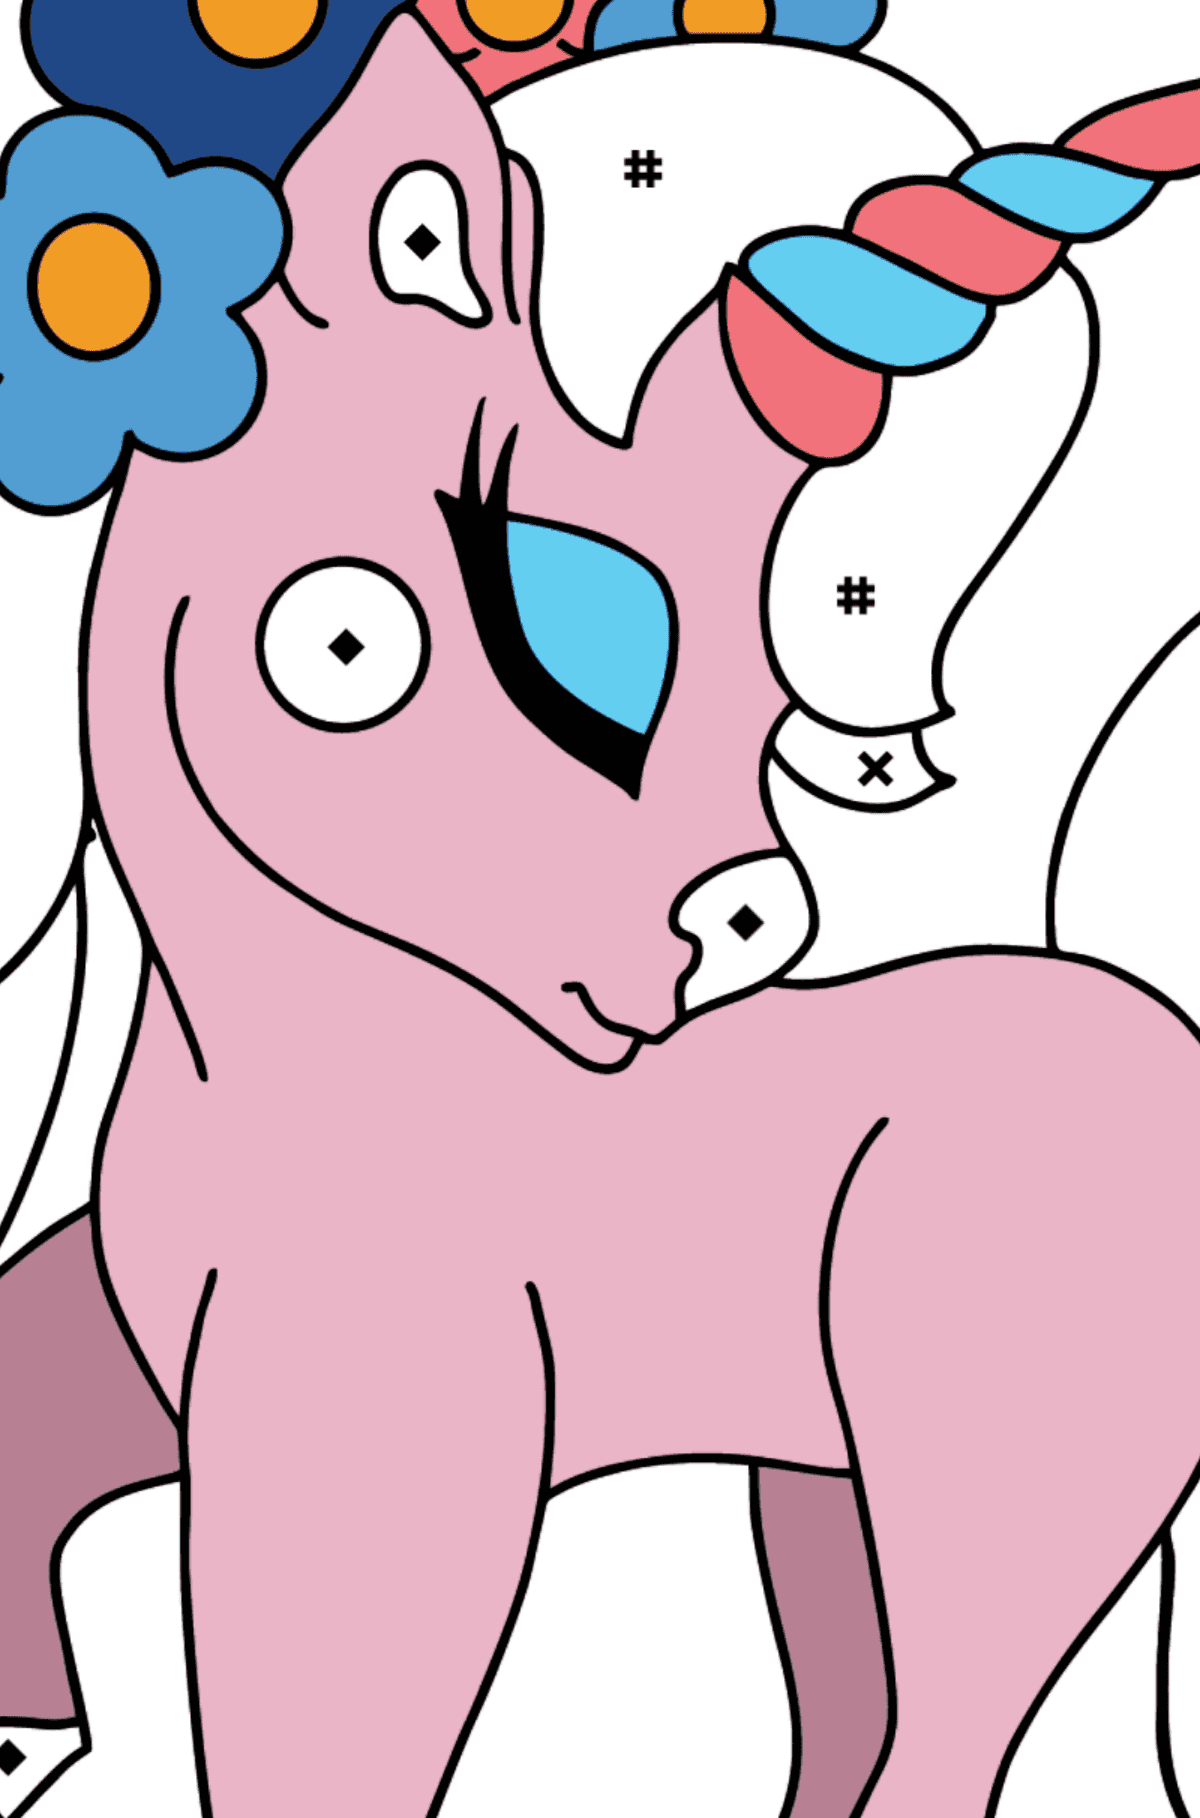 Unicorn in Dreams coloring page - Coloring by Symbols for Kids